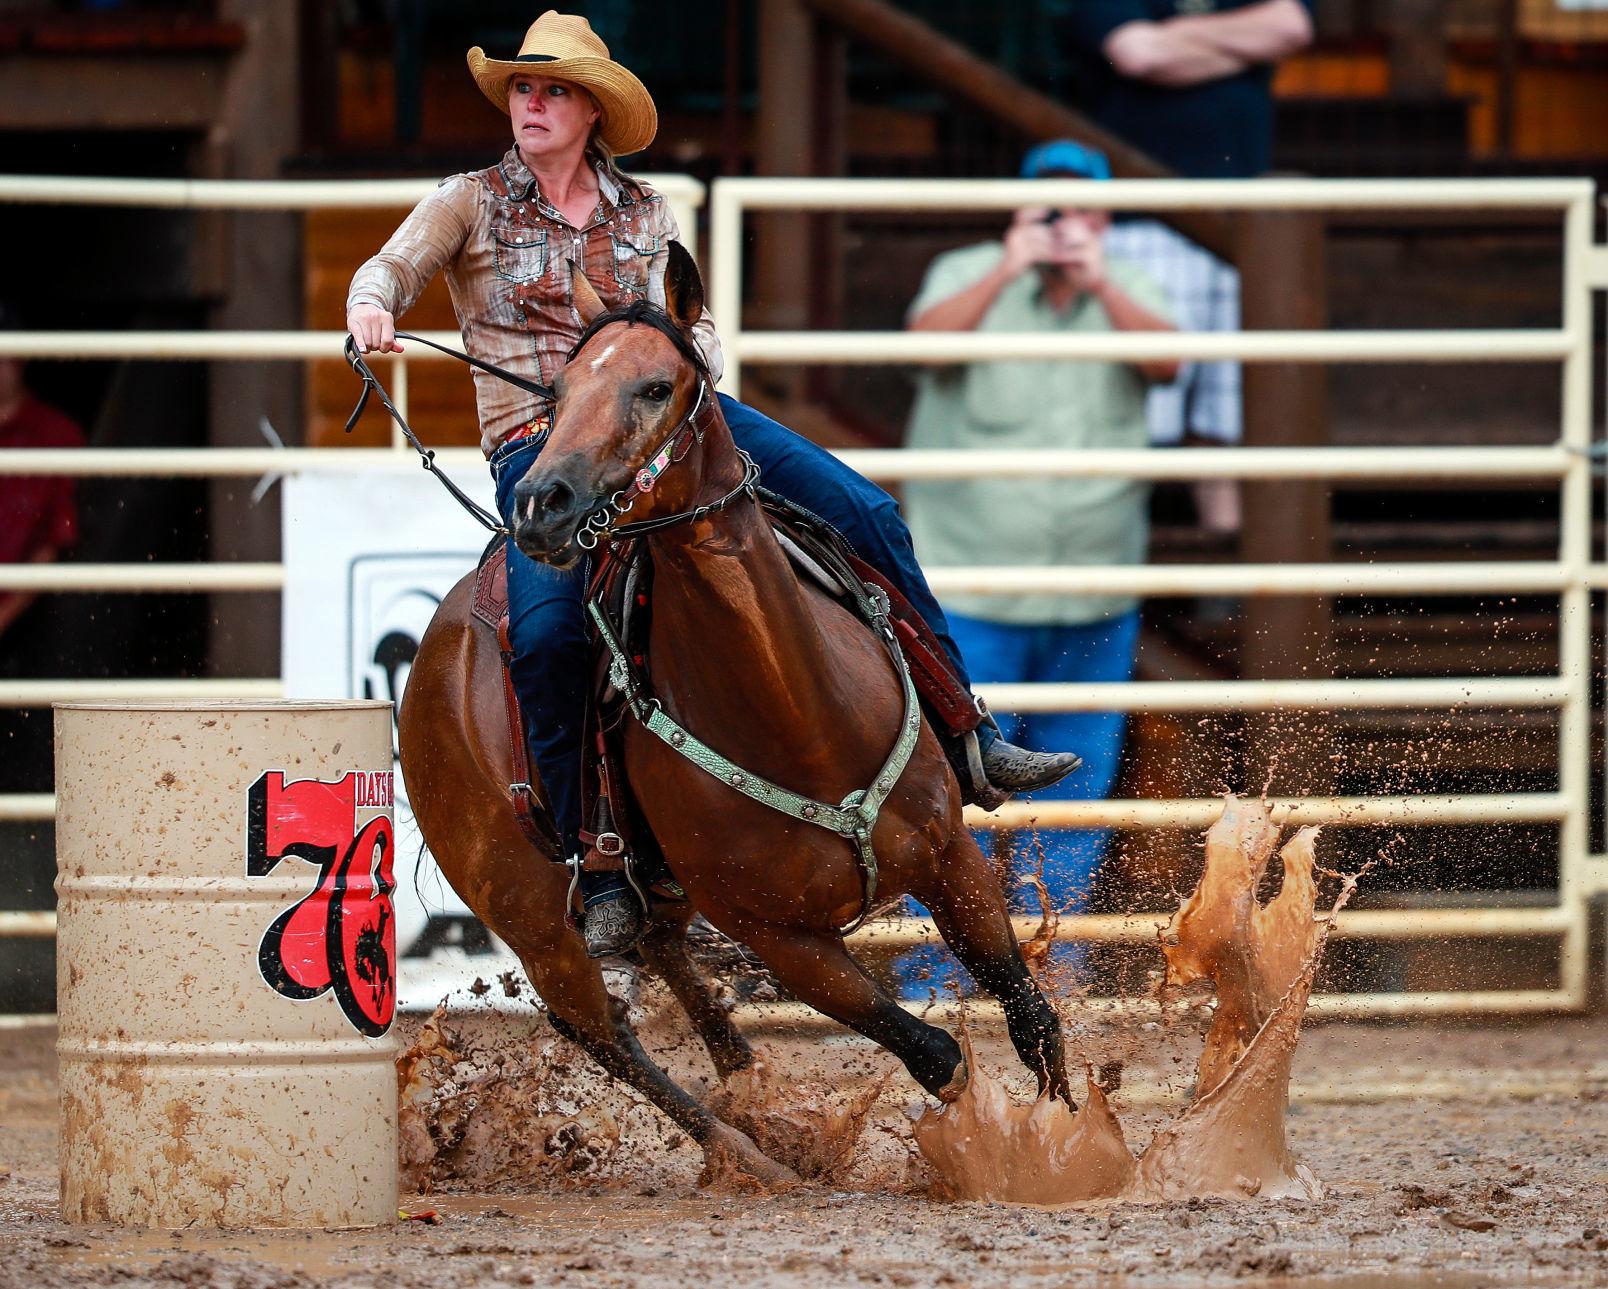 PHOTOS Saturday afternoon's sloppy PRCA Rodeo in Deadwood Rodeo